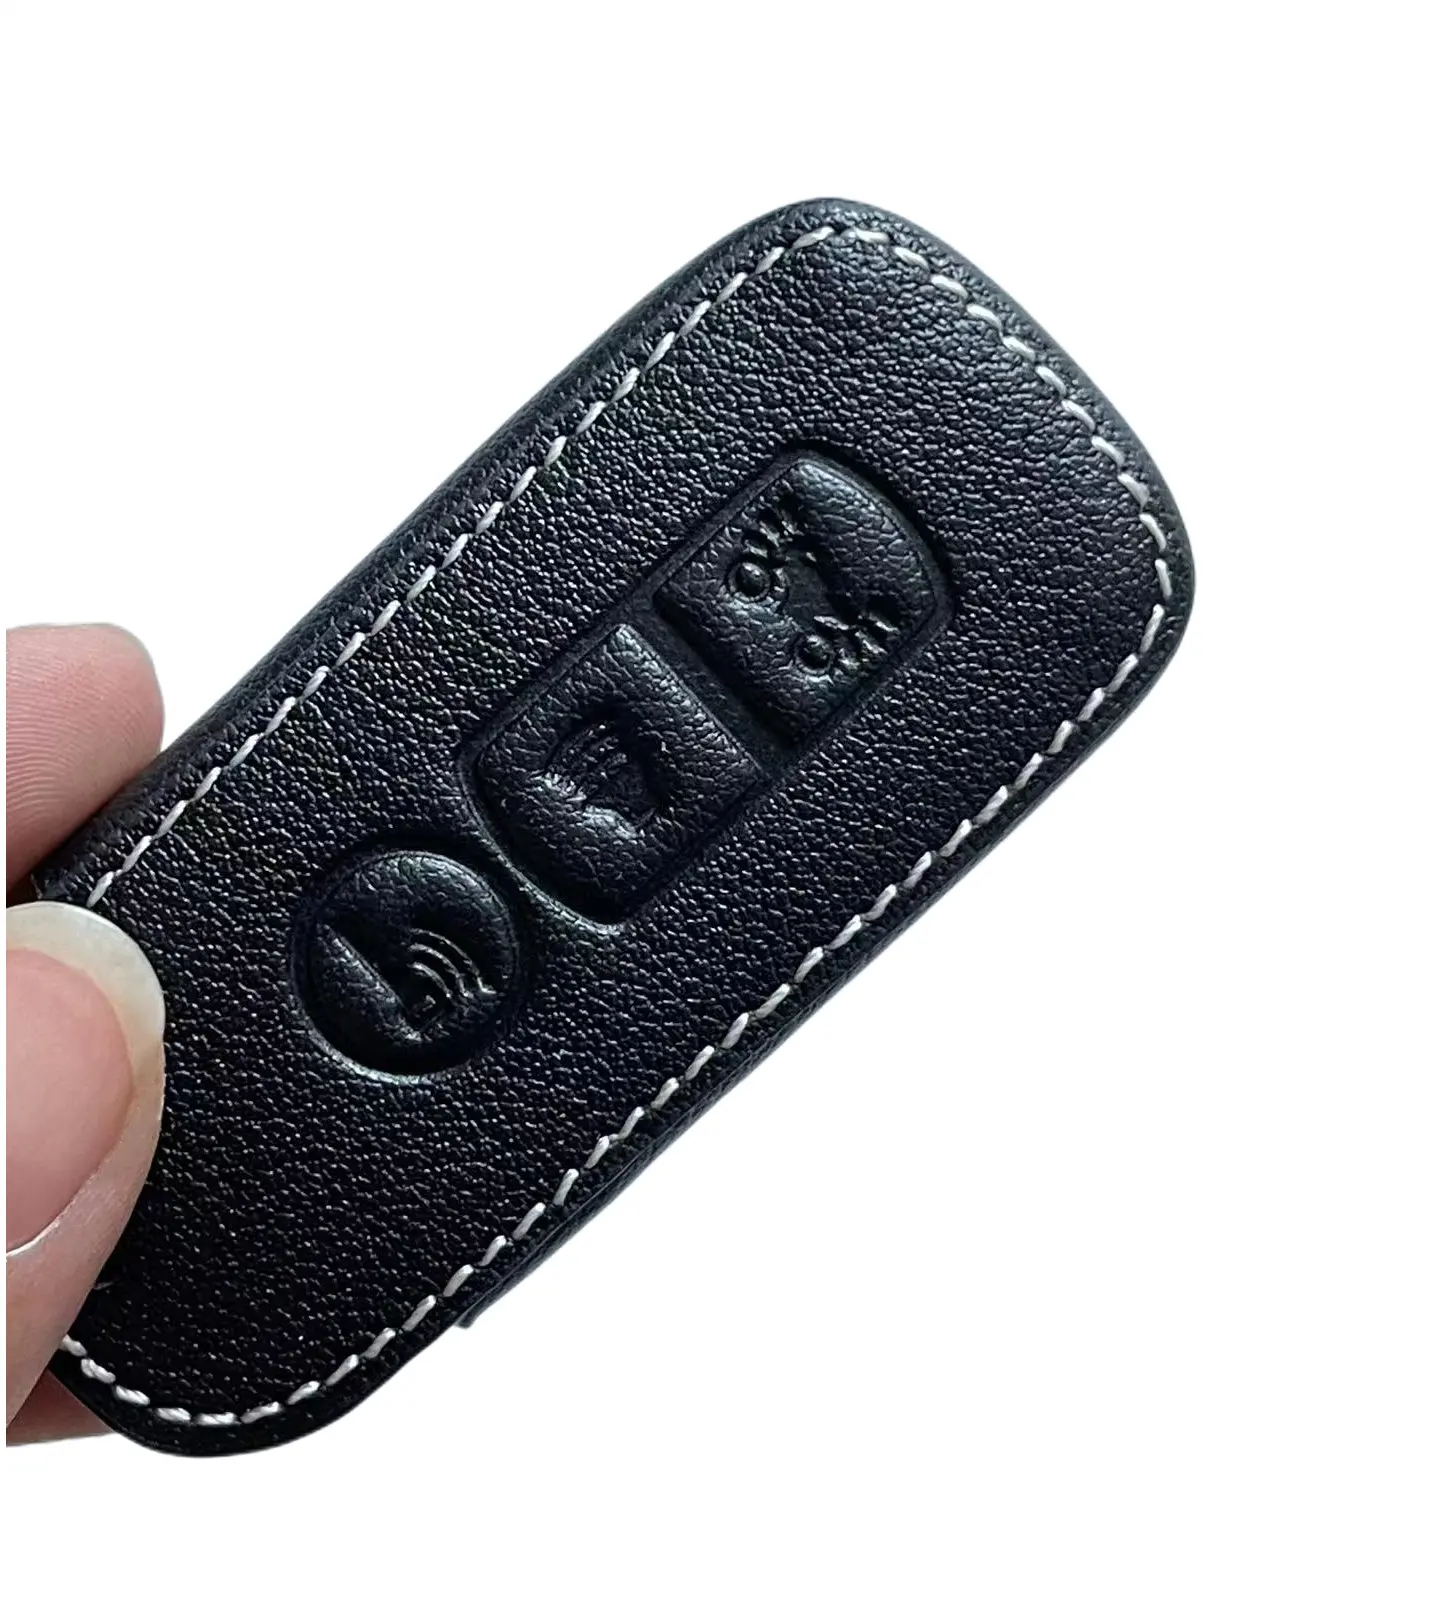 Leather Car Key Cover with Leather Car Key Holder Factory produces custom car key sets for all models Custom